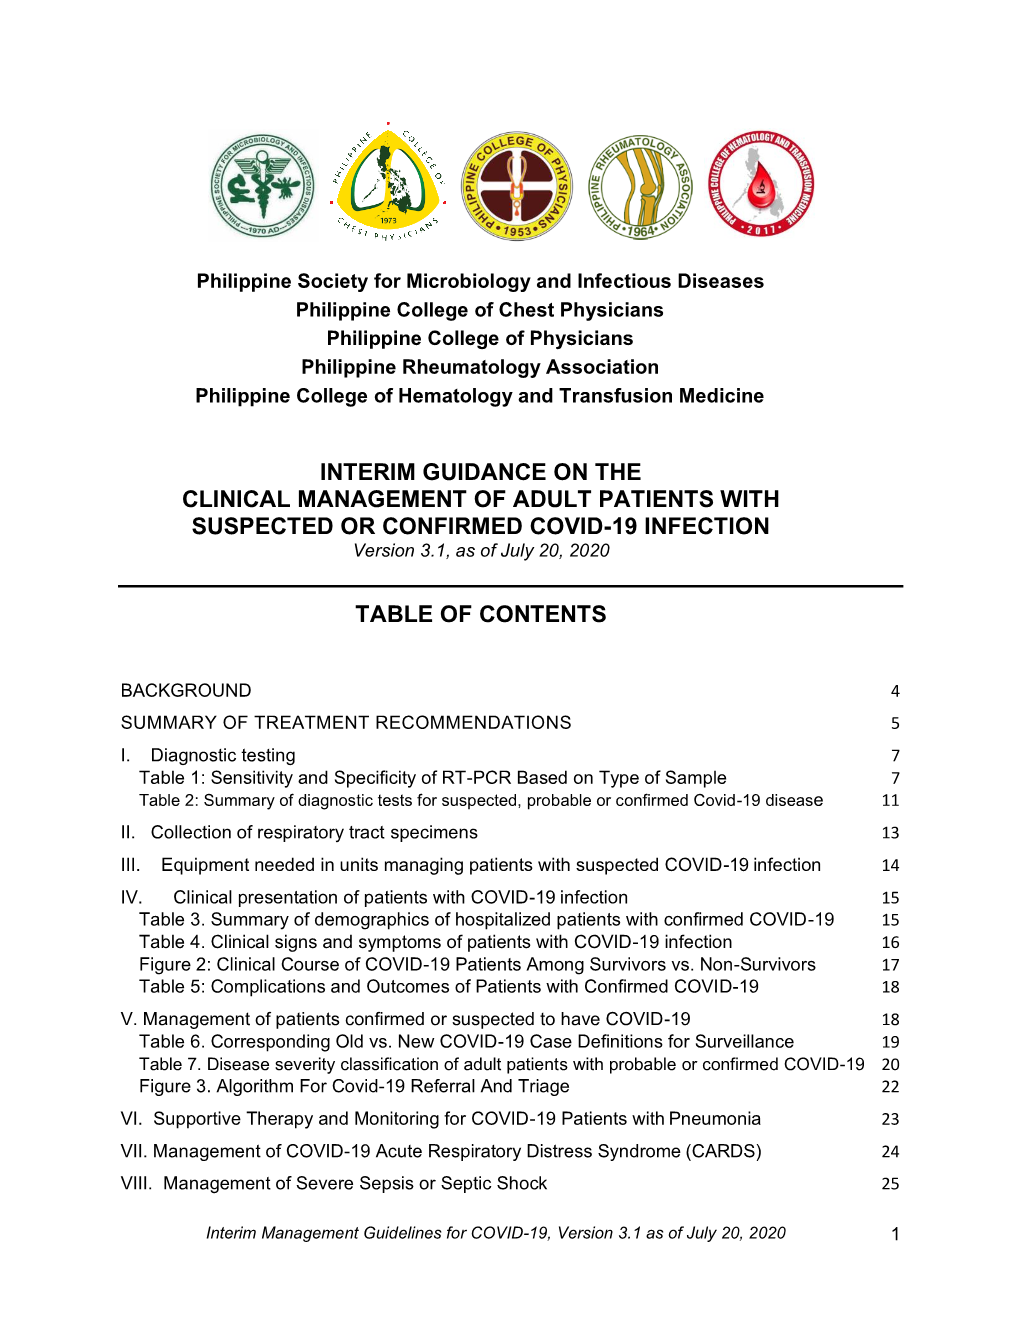 DOWNLOAD the Interim Management Guidelines for COVID-19